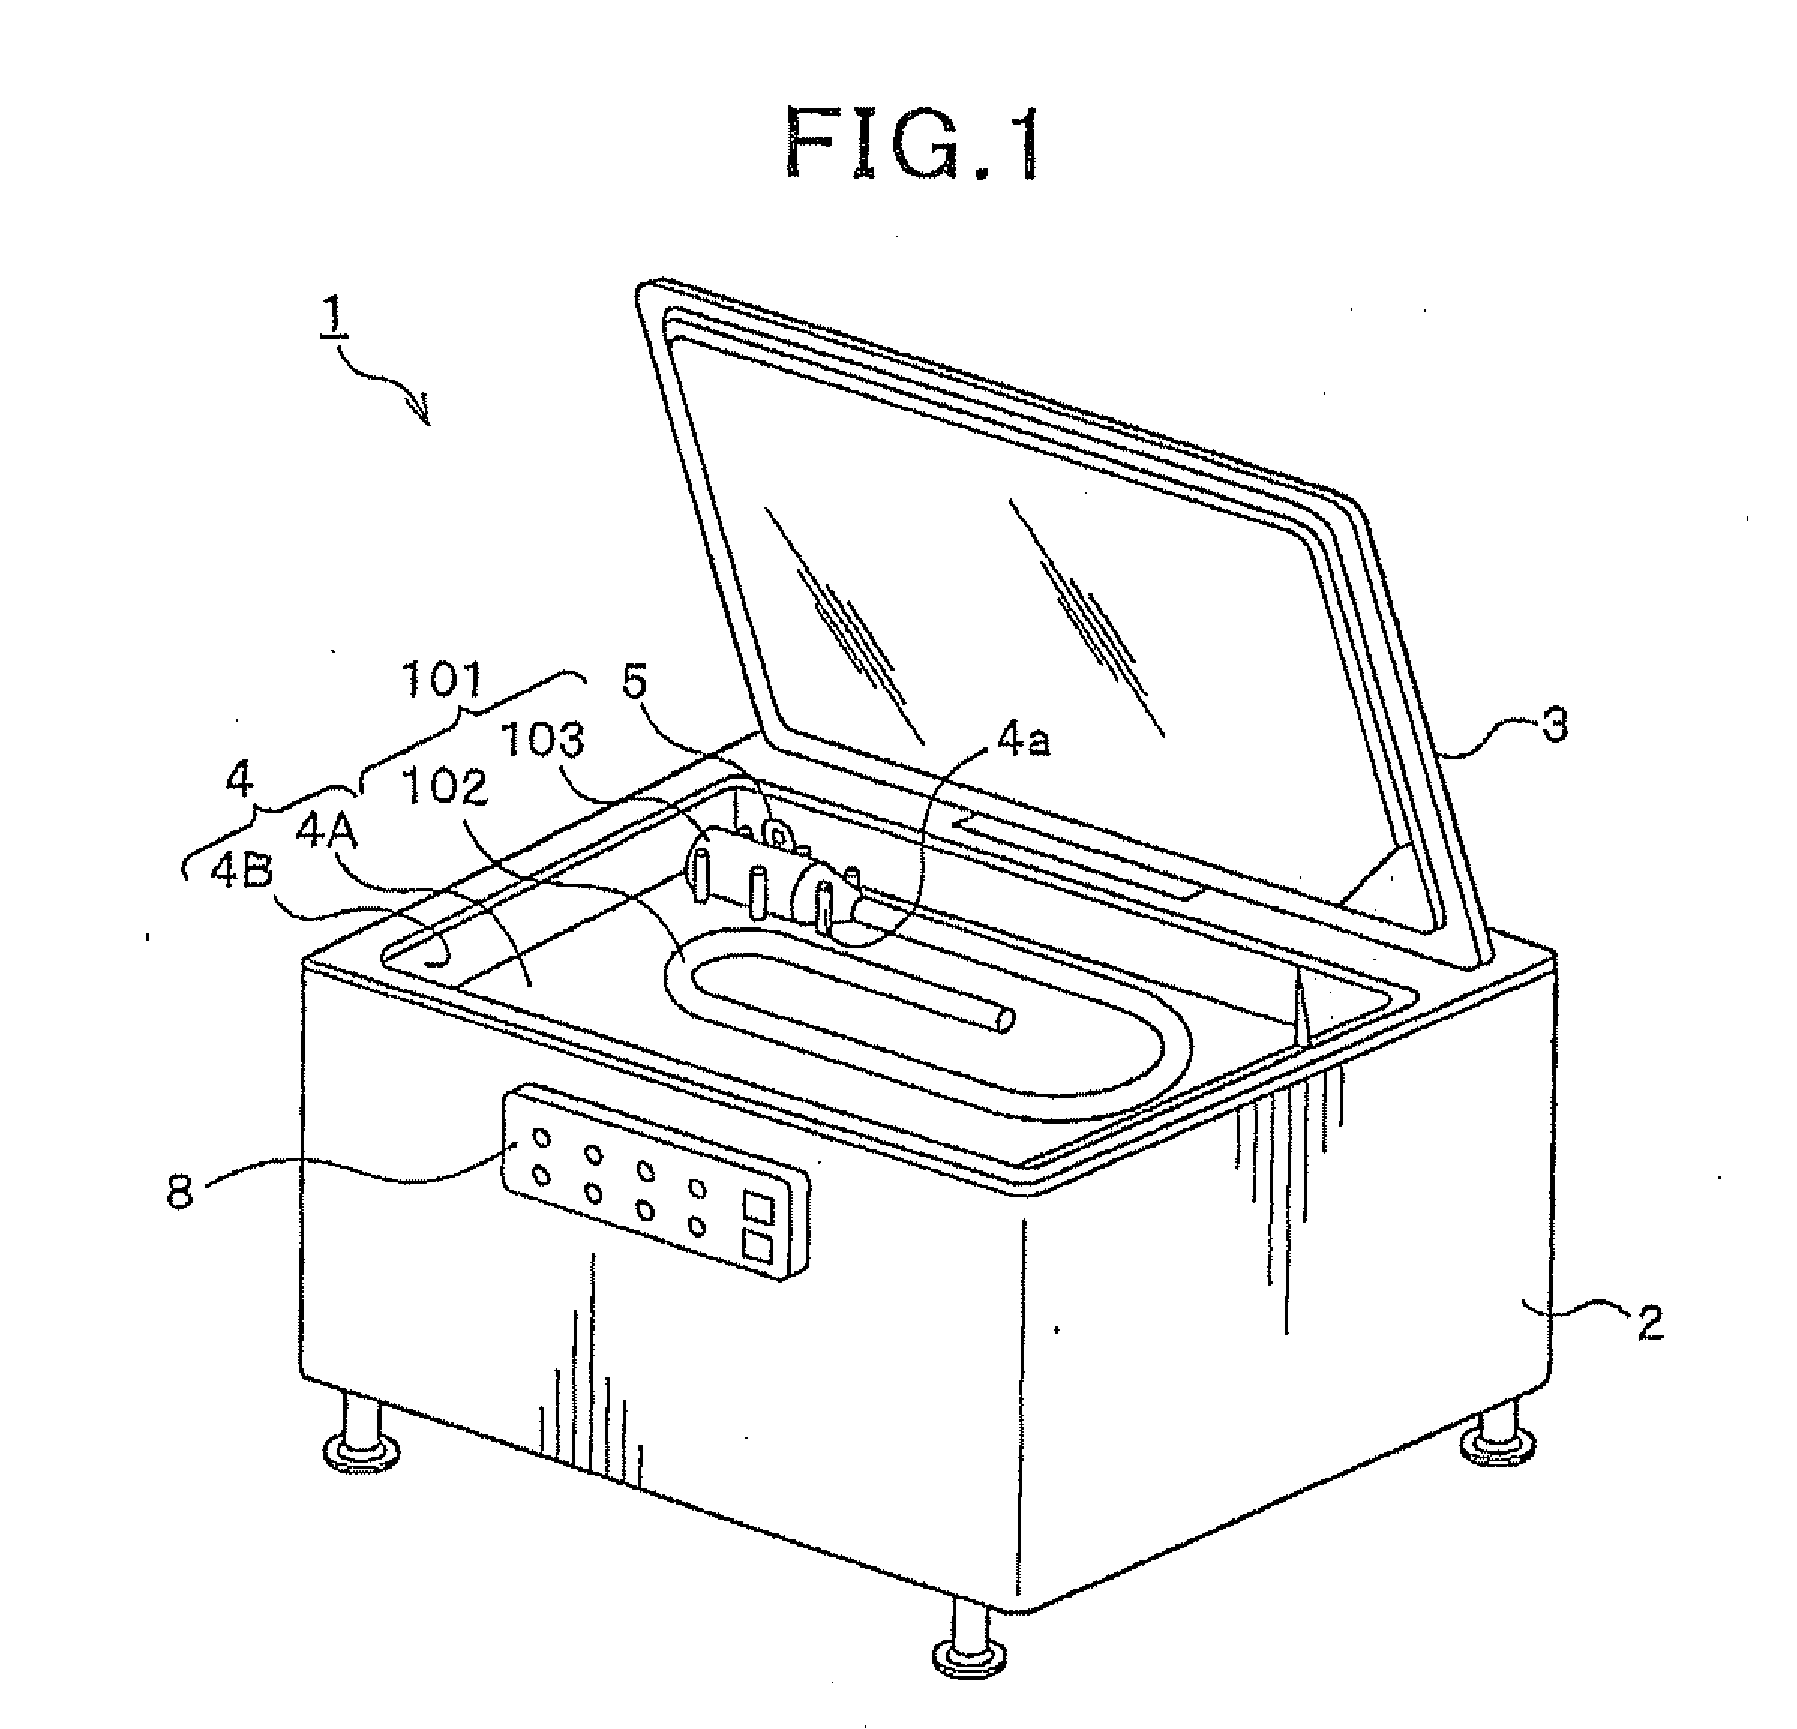 Endoscope washer disinfector equipped with nozzle connectable to endoscopic channels automatically